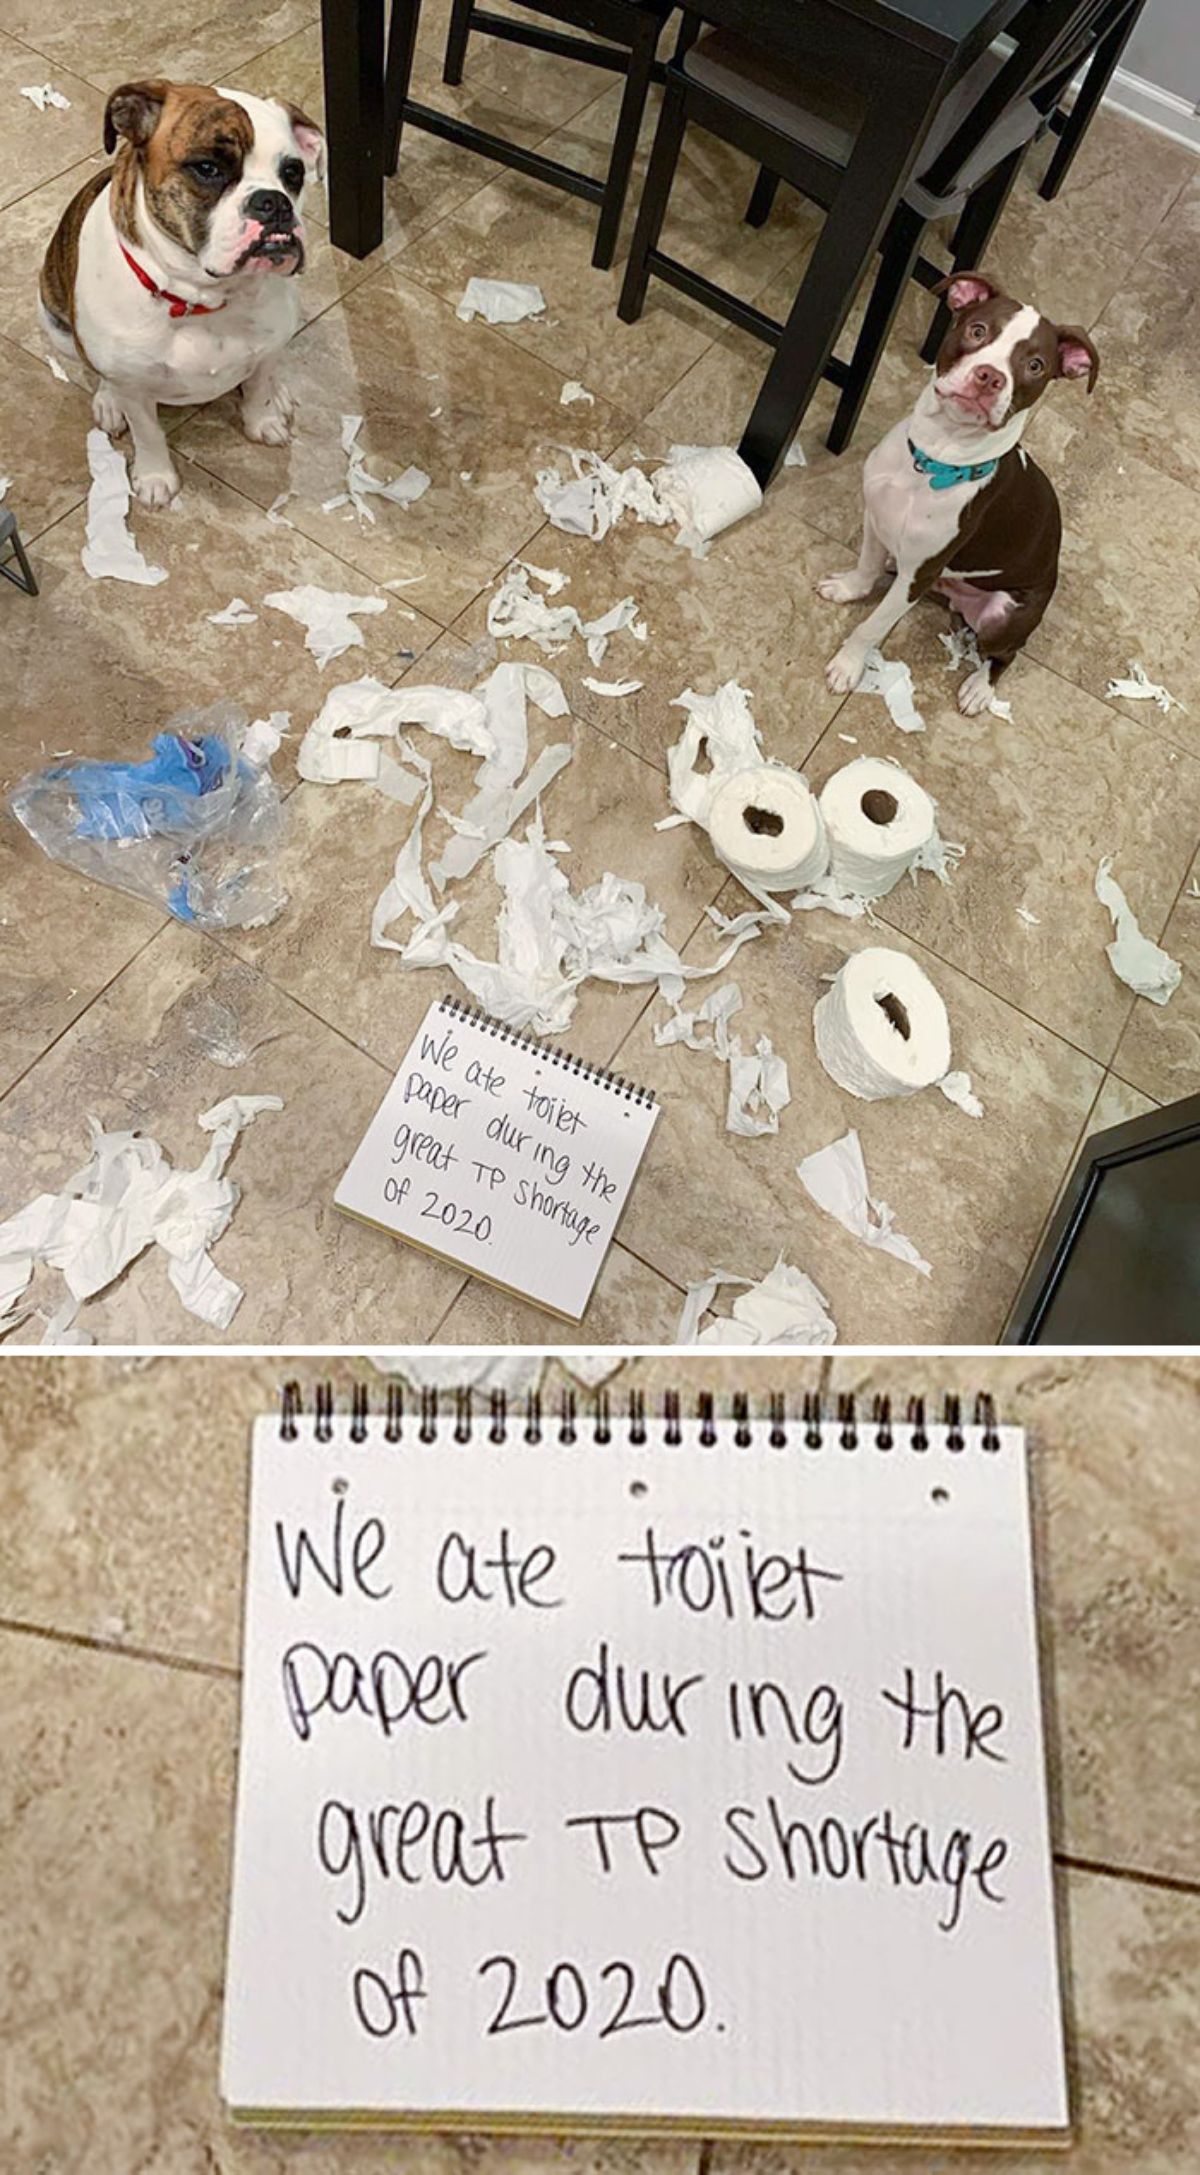 brown and white bulldog and pit bull sitting on floor next to ripped up toilet paper rolls with a note saying the two dogs ate toilet paper during the great toilet paper shortage of 2020